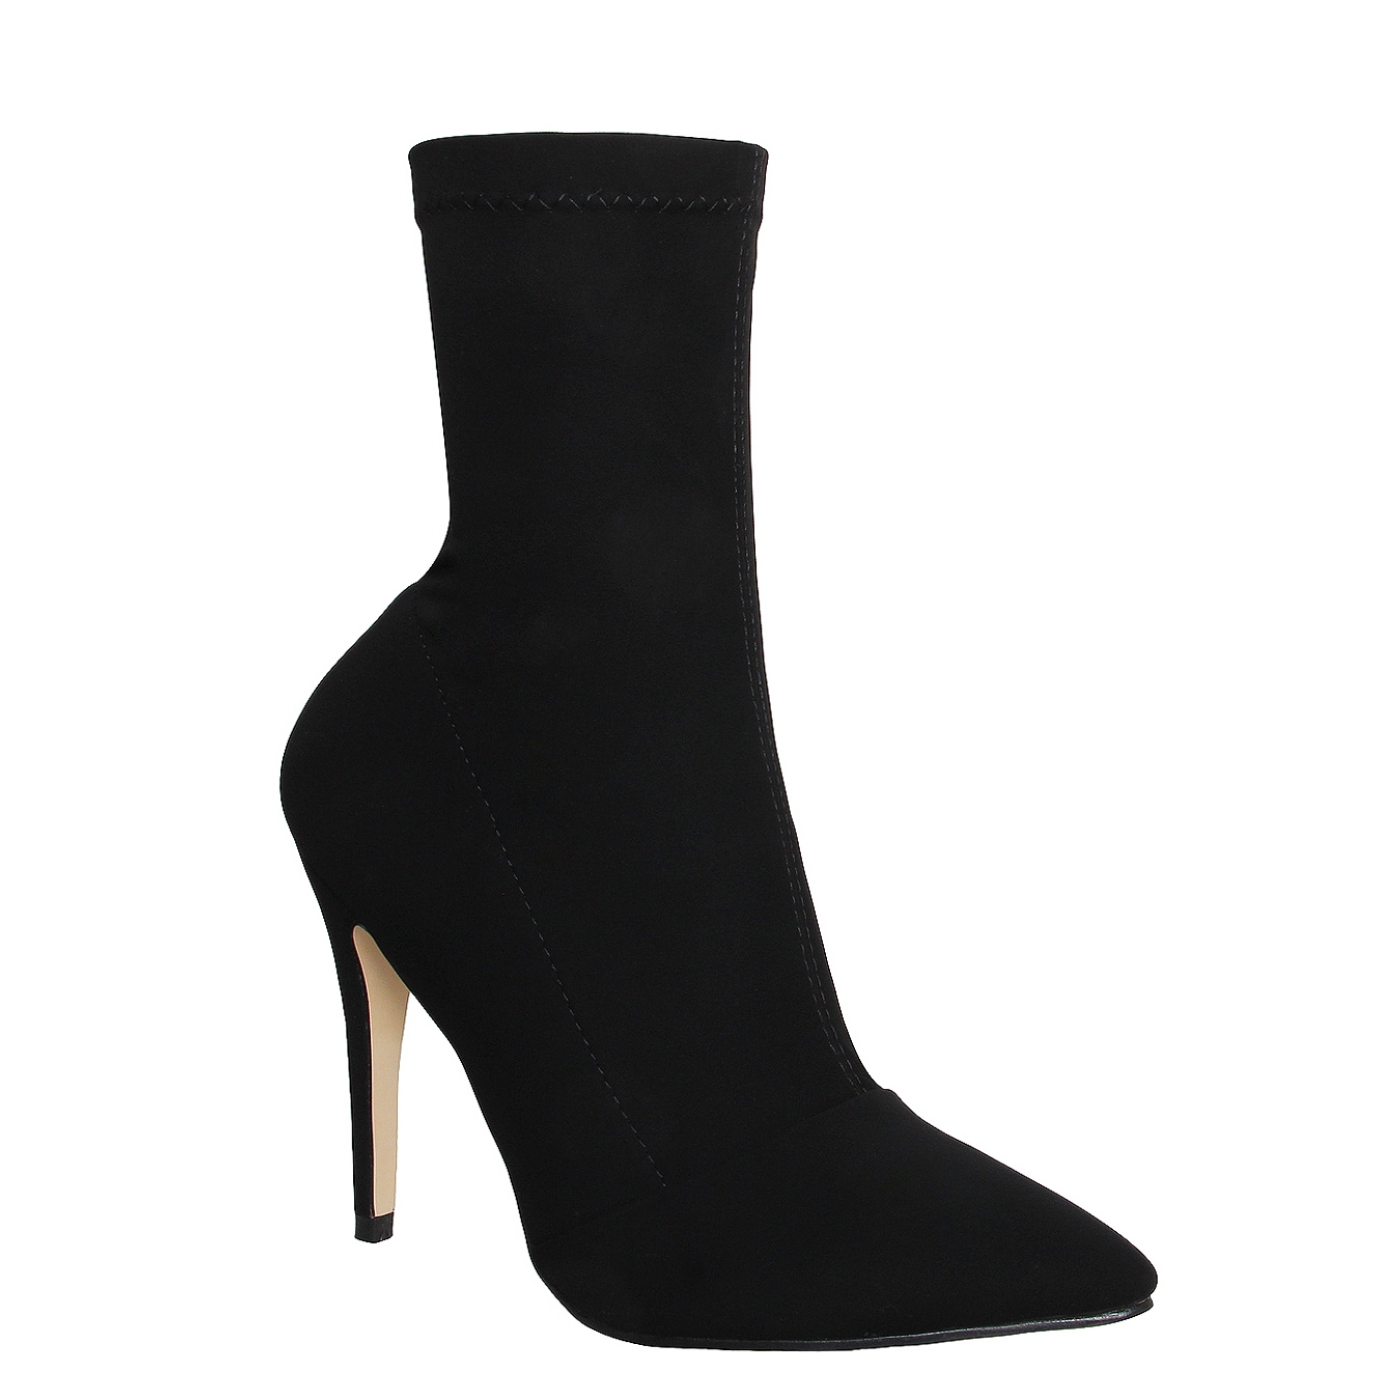 Tegan Black Suede Pointed Toe Ankle Boots